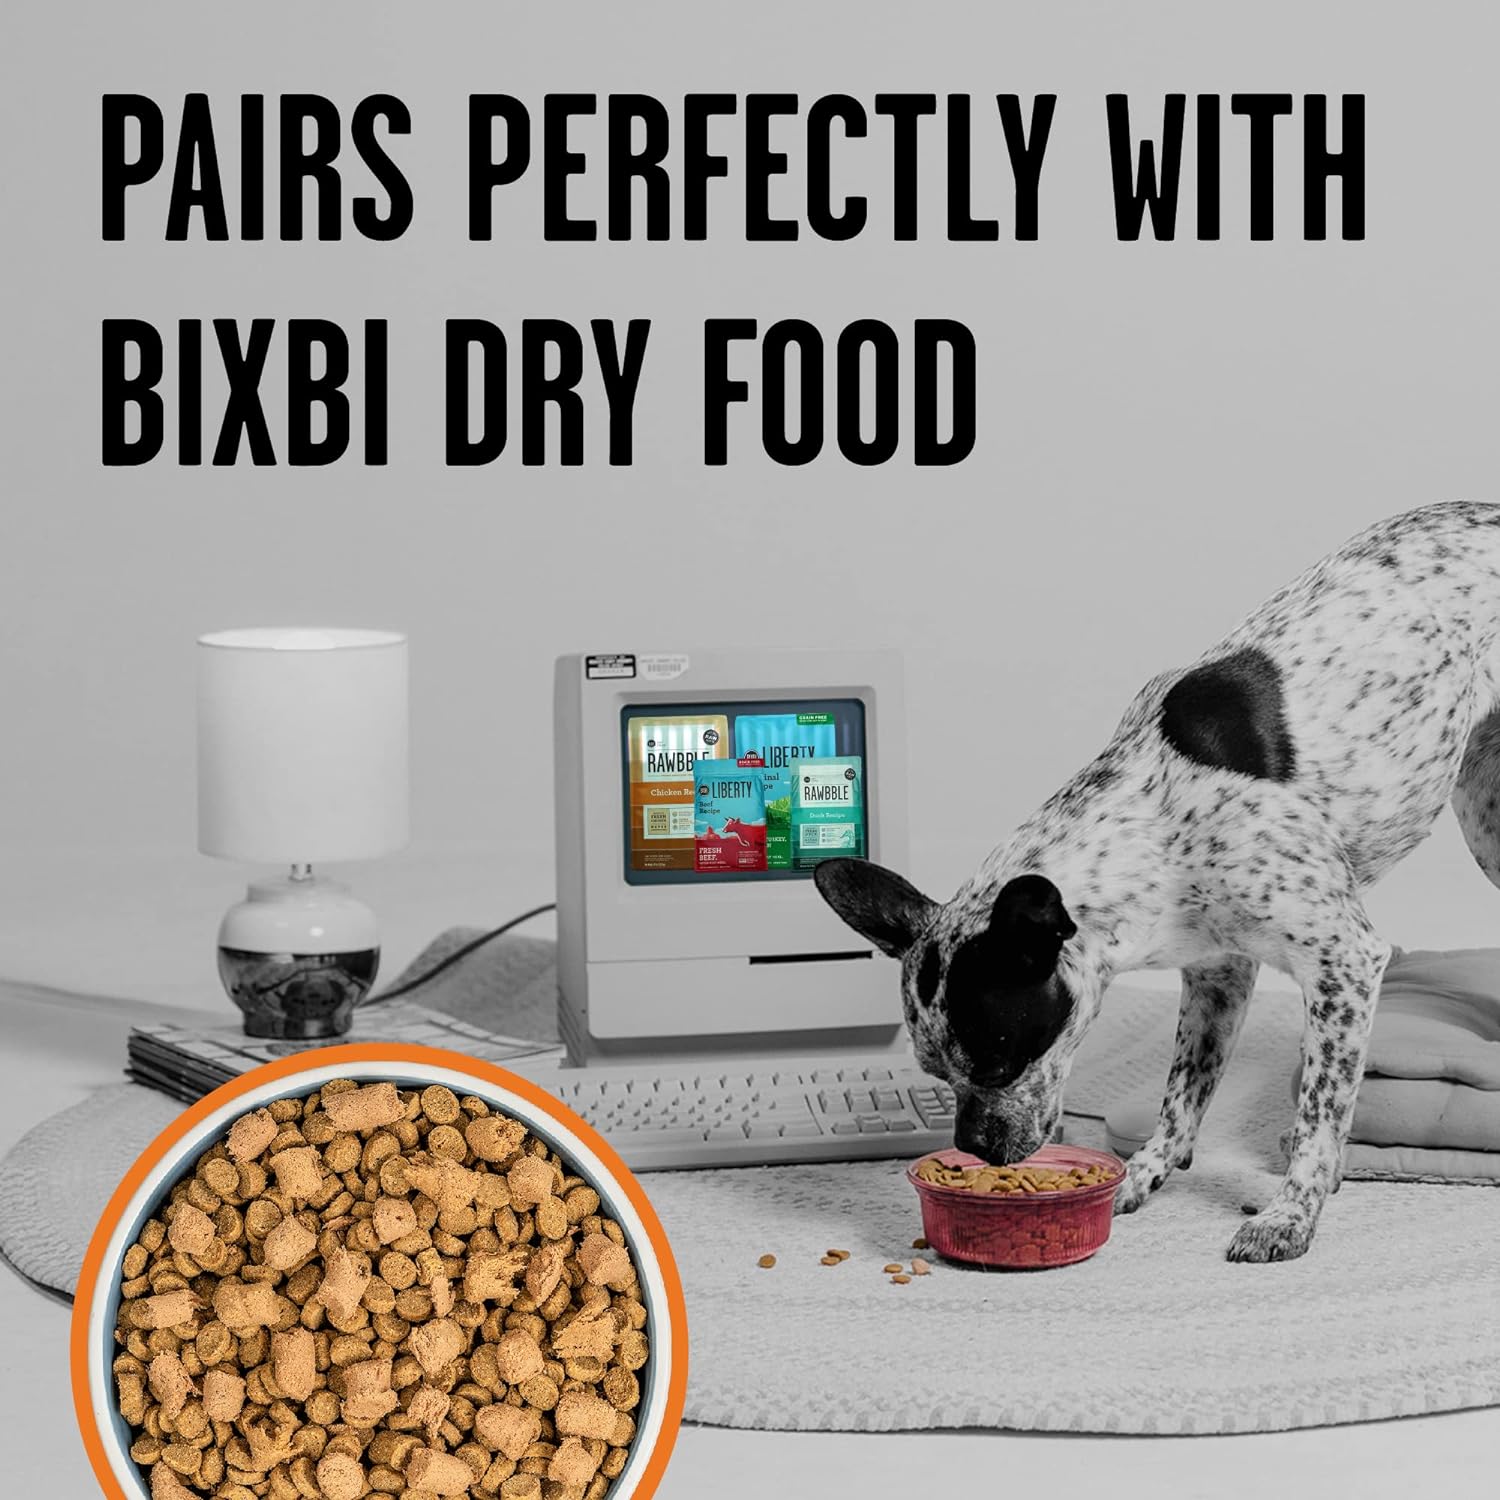 BIXBI Rawbble Freeze Dried Dog Food, Chicken Recipe, 4.5 oz - 98% Meat and Organs, No Fillers - Pantry-Friendly Raw Dog Food for Meal, Treat or Food Topper - USA Made in Small Batches : Pet Supplies